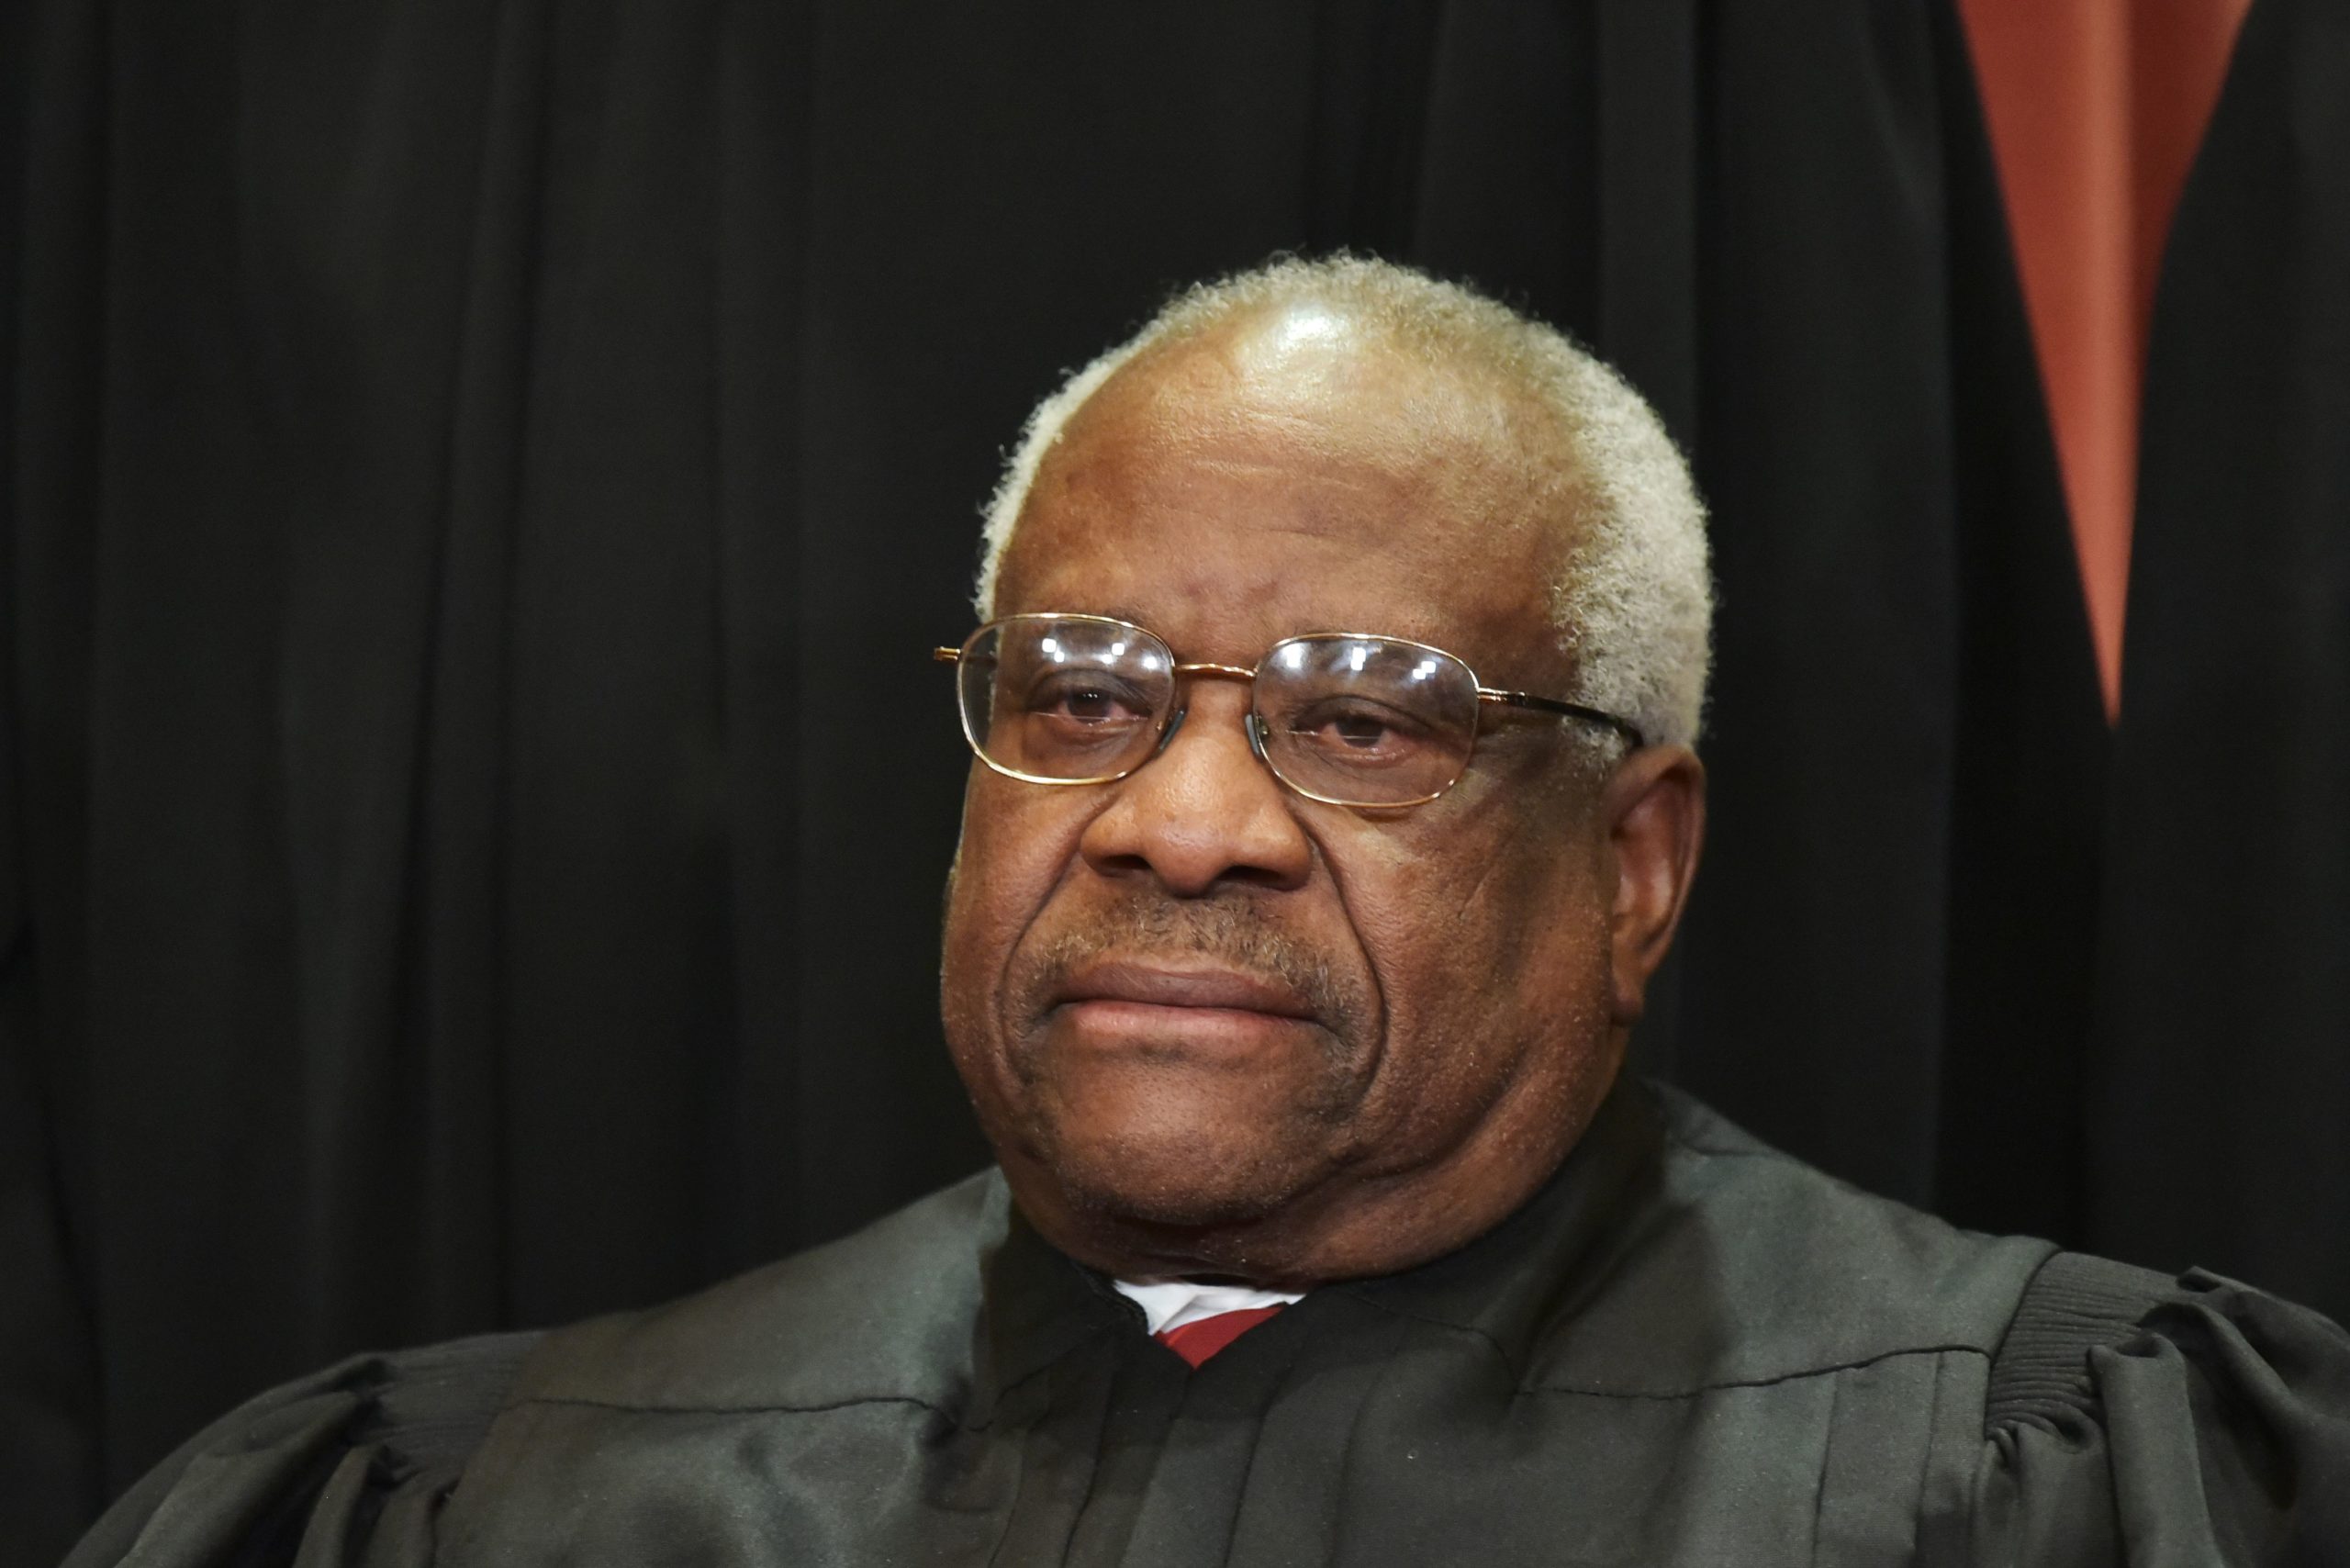 Associate Justice Clarence Thomas poses for the official group photo at the US Supreme Court in Washington, DC on November 30, 2018. (Photo by MANDEL NGAN / AFP) (Photo credit should read MANDEL NGAN/AFP via Getty Images)